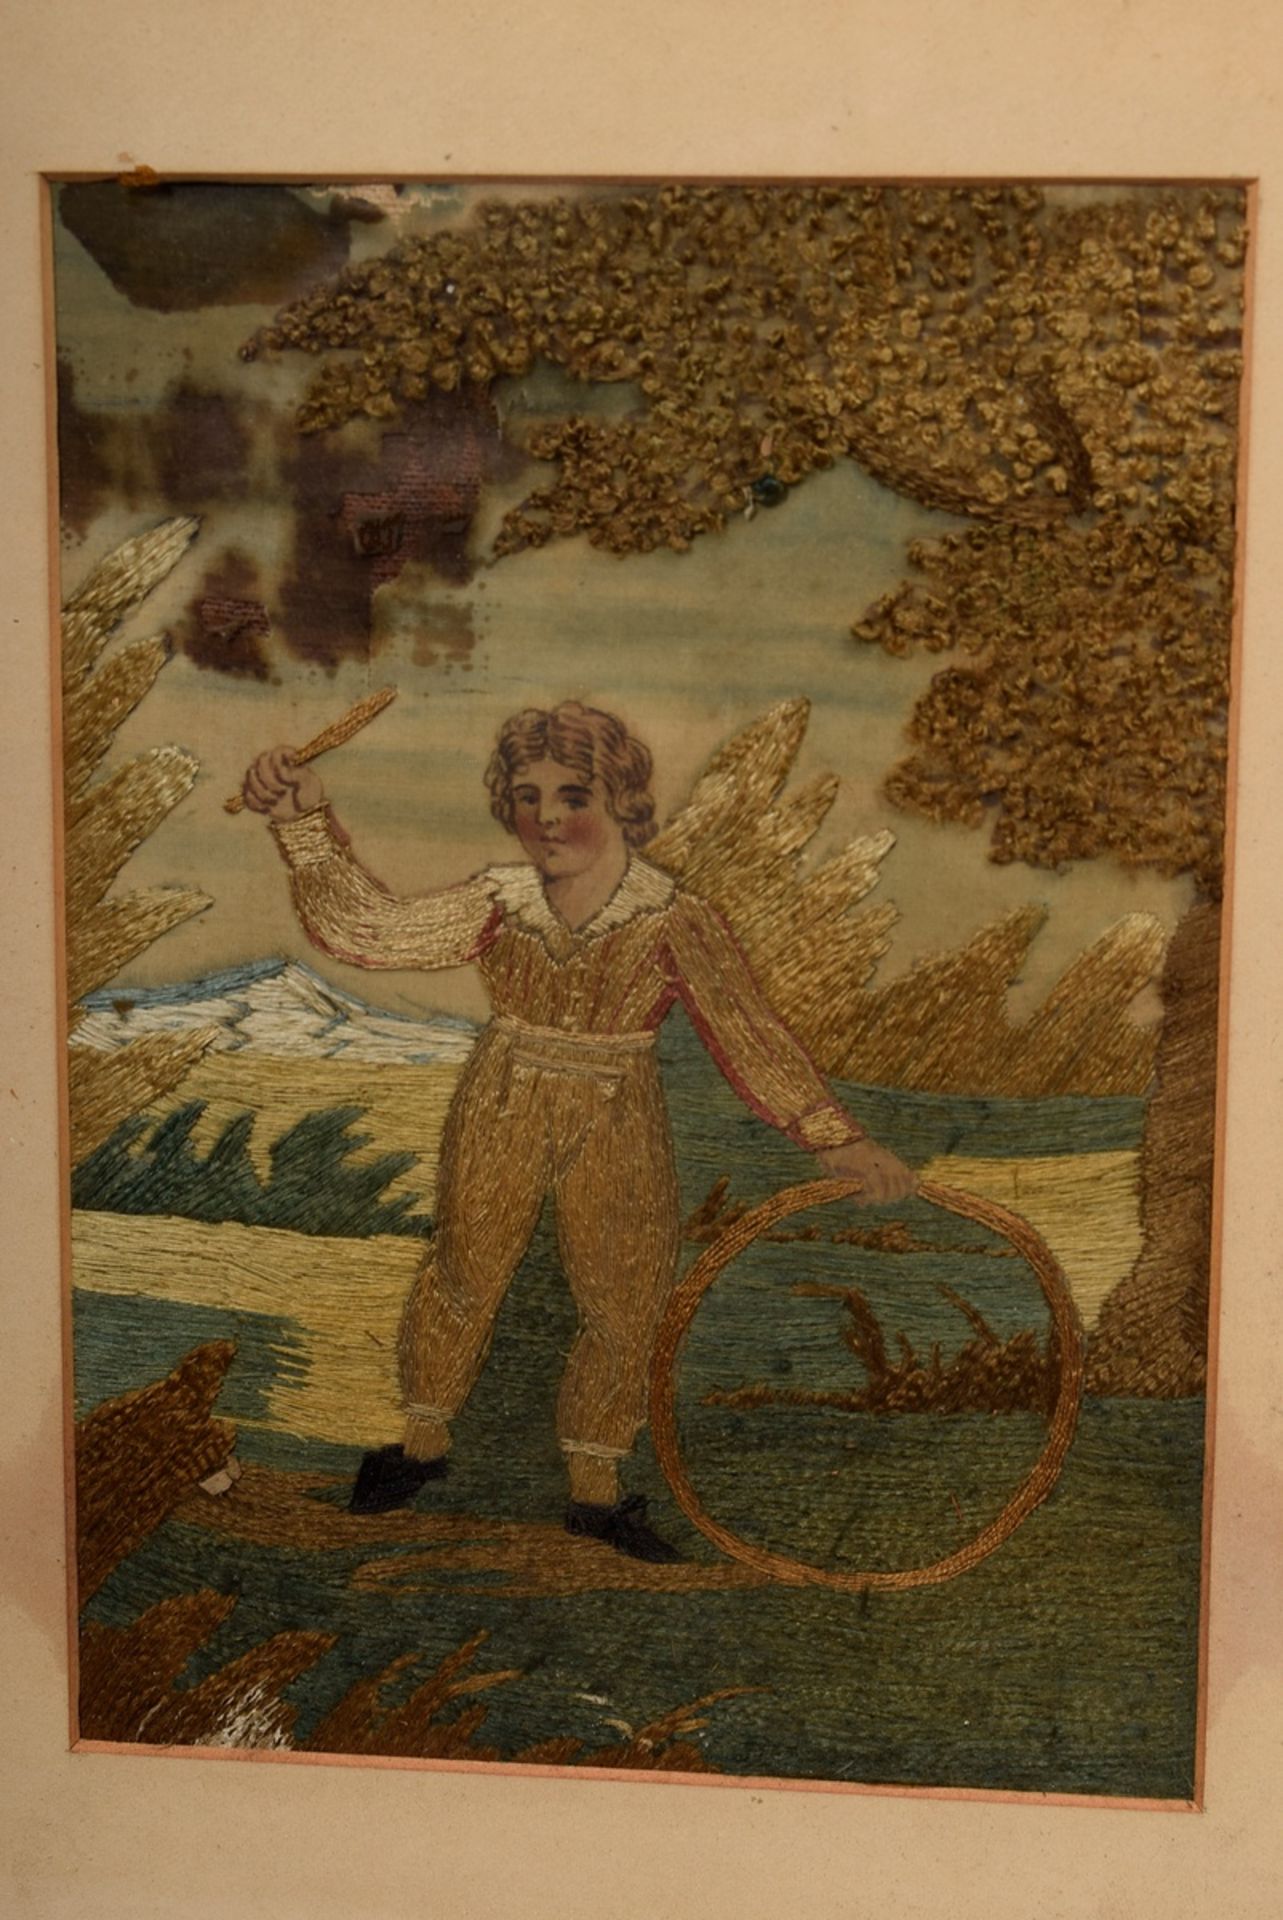 2 Various early Biedermeier embroidery pictures "Little boy with hoop" and "Biblical scene" (Noah), - Image 7 of 8